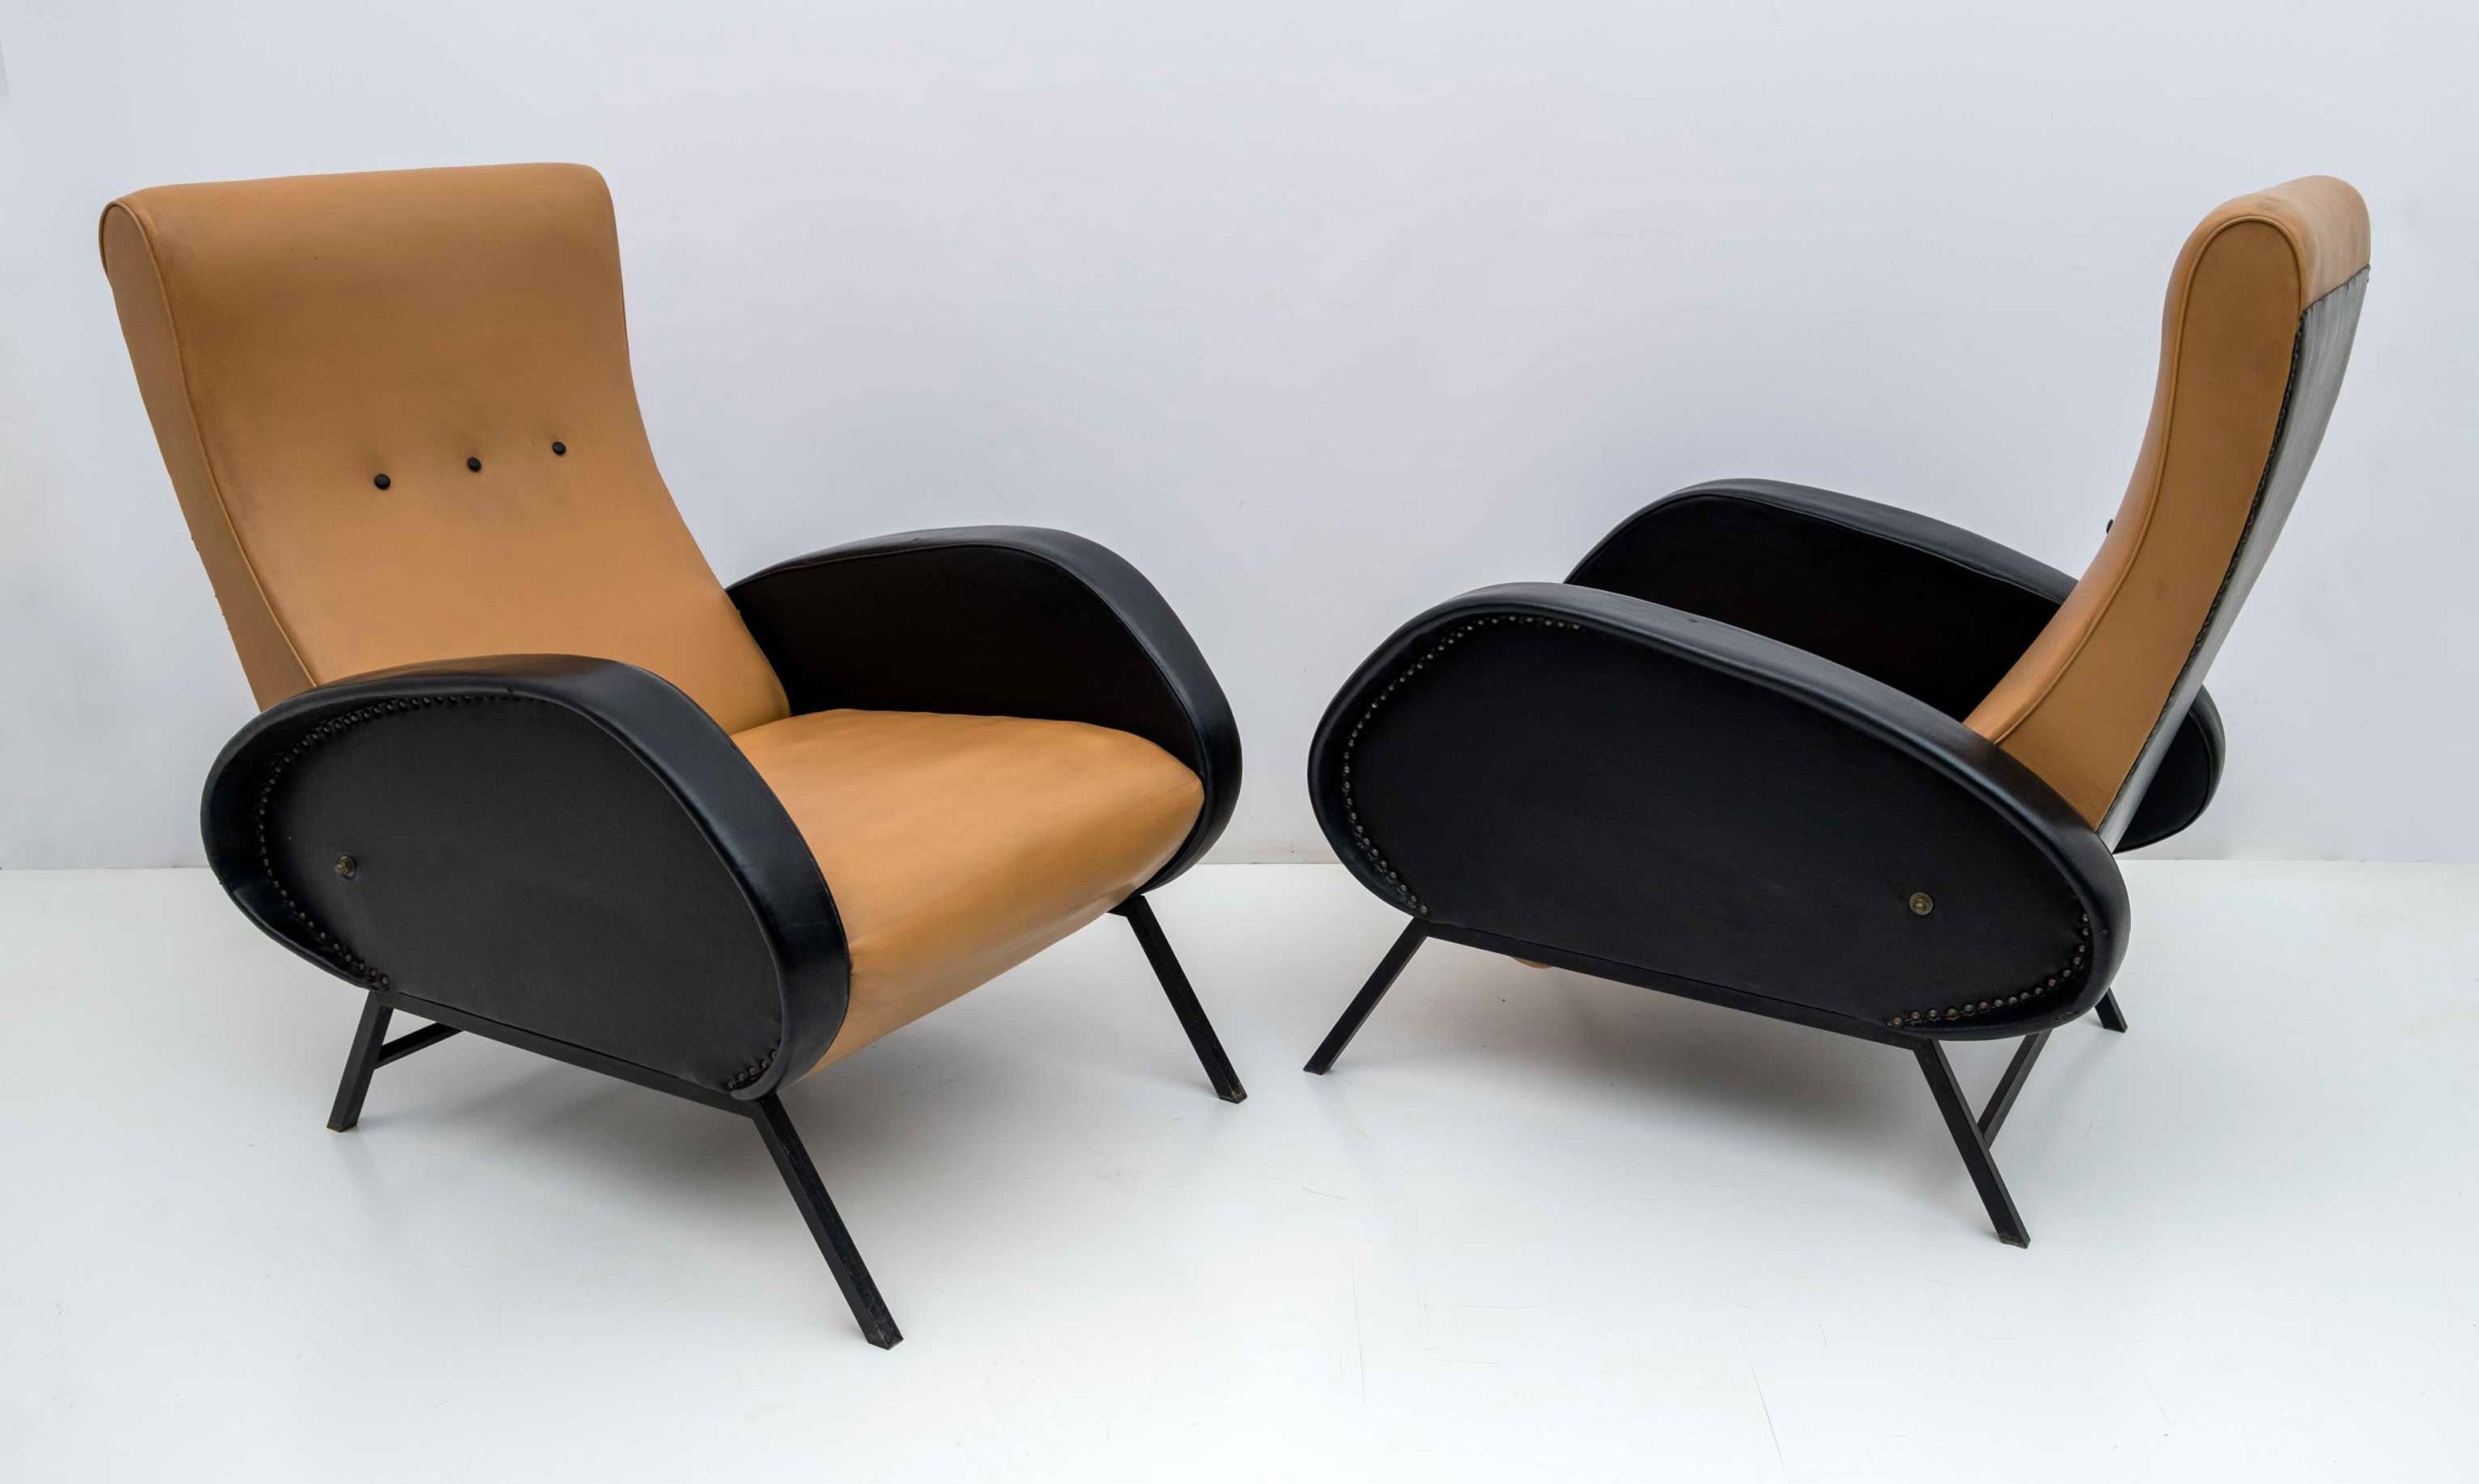 Pair of reclining armchairs designed by Marco Zanuso in the 1950s. The armchairs have their original eco-leather upholstery, as shown in the photos. The upholstery is worn. A new upholstery is recommended. The reclining chair measures 150 cm.